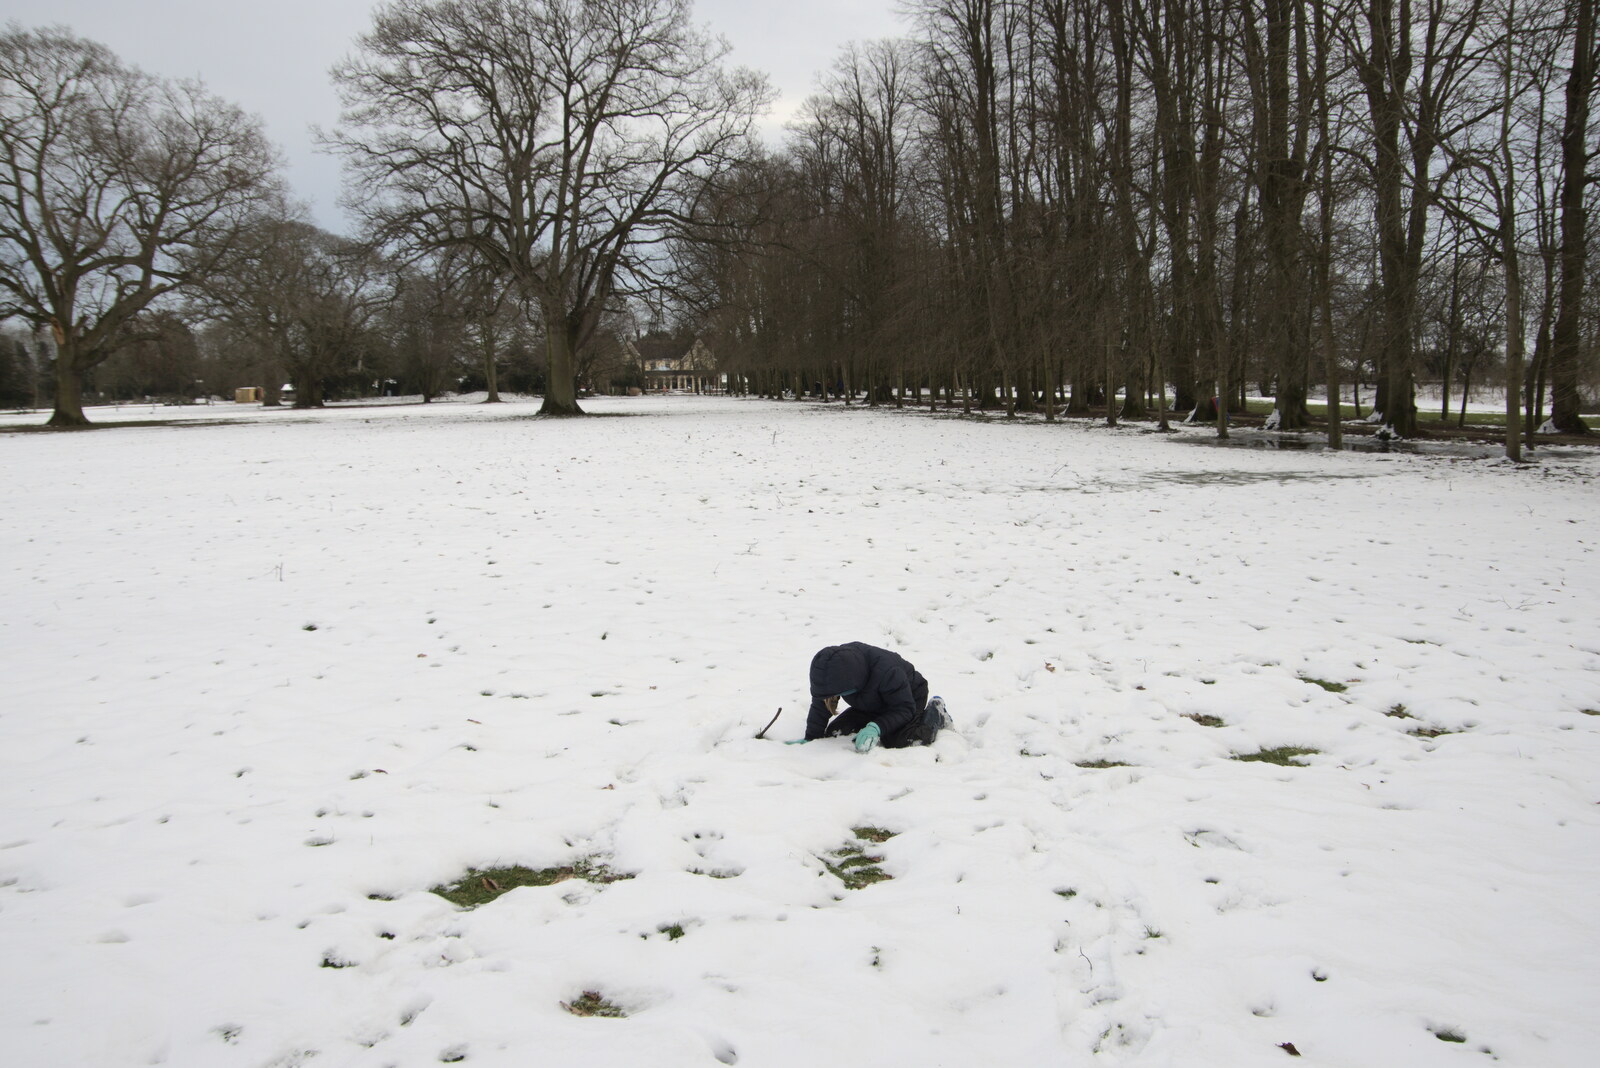 Harry digs around in the snow from Derelict Infants School and Ice Sculptures, Diss and Palgrave, Norfolk and Suffolk - 13th February 2021